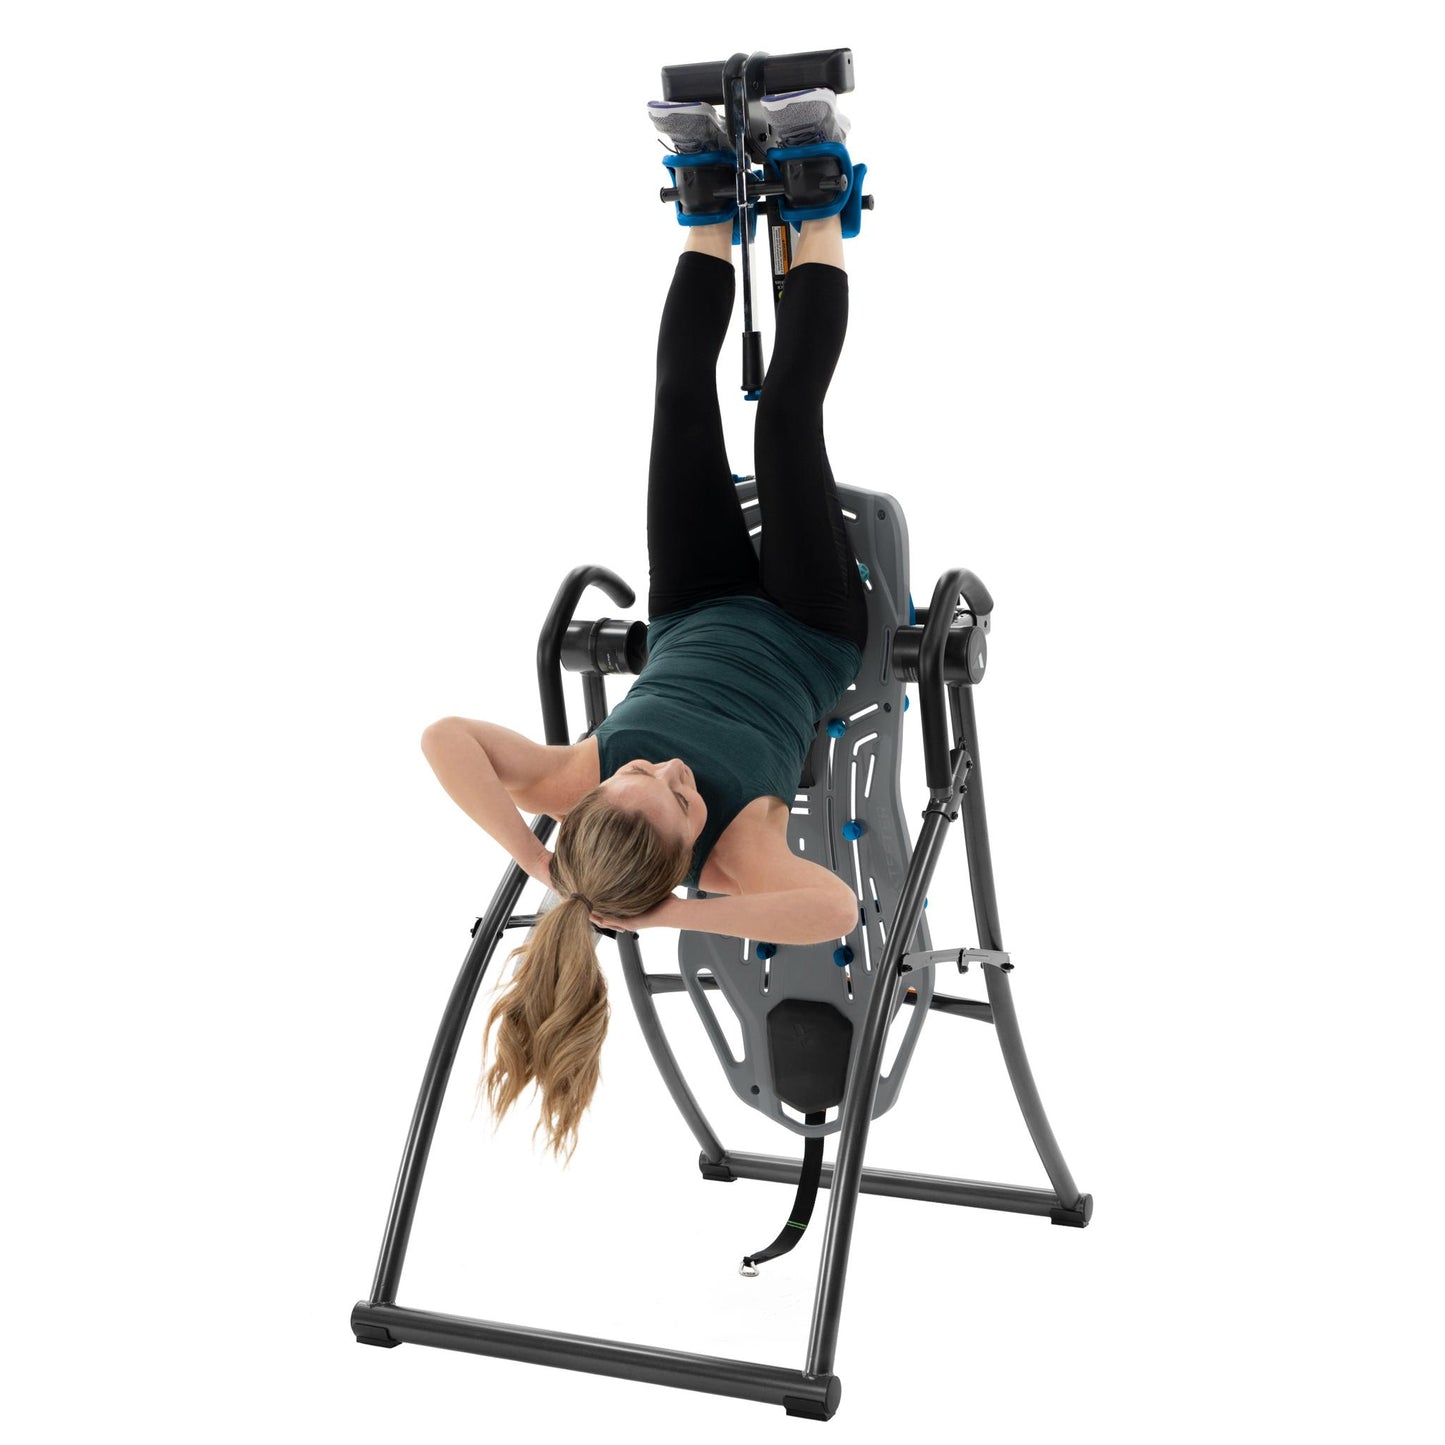 Teeter FitSpine XC5 Inversion Table